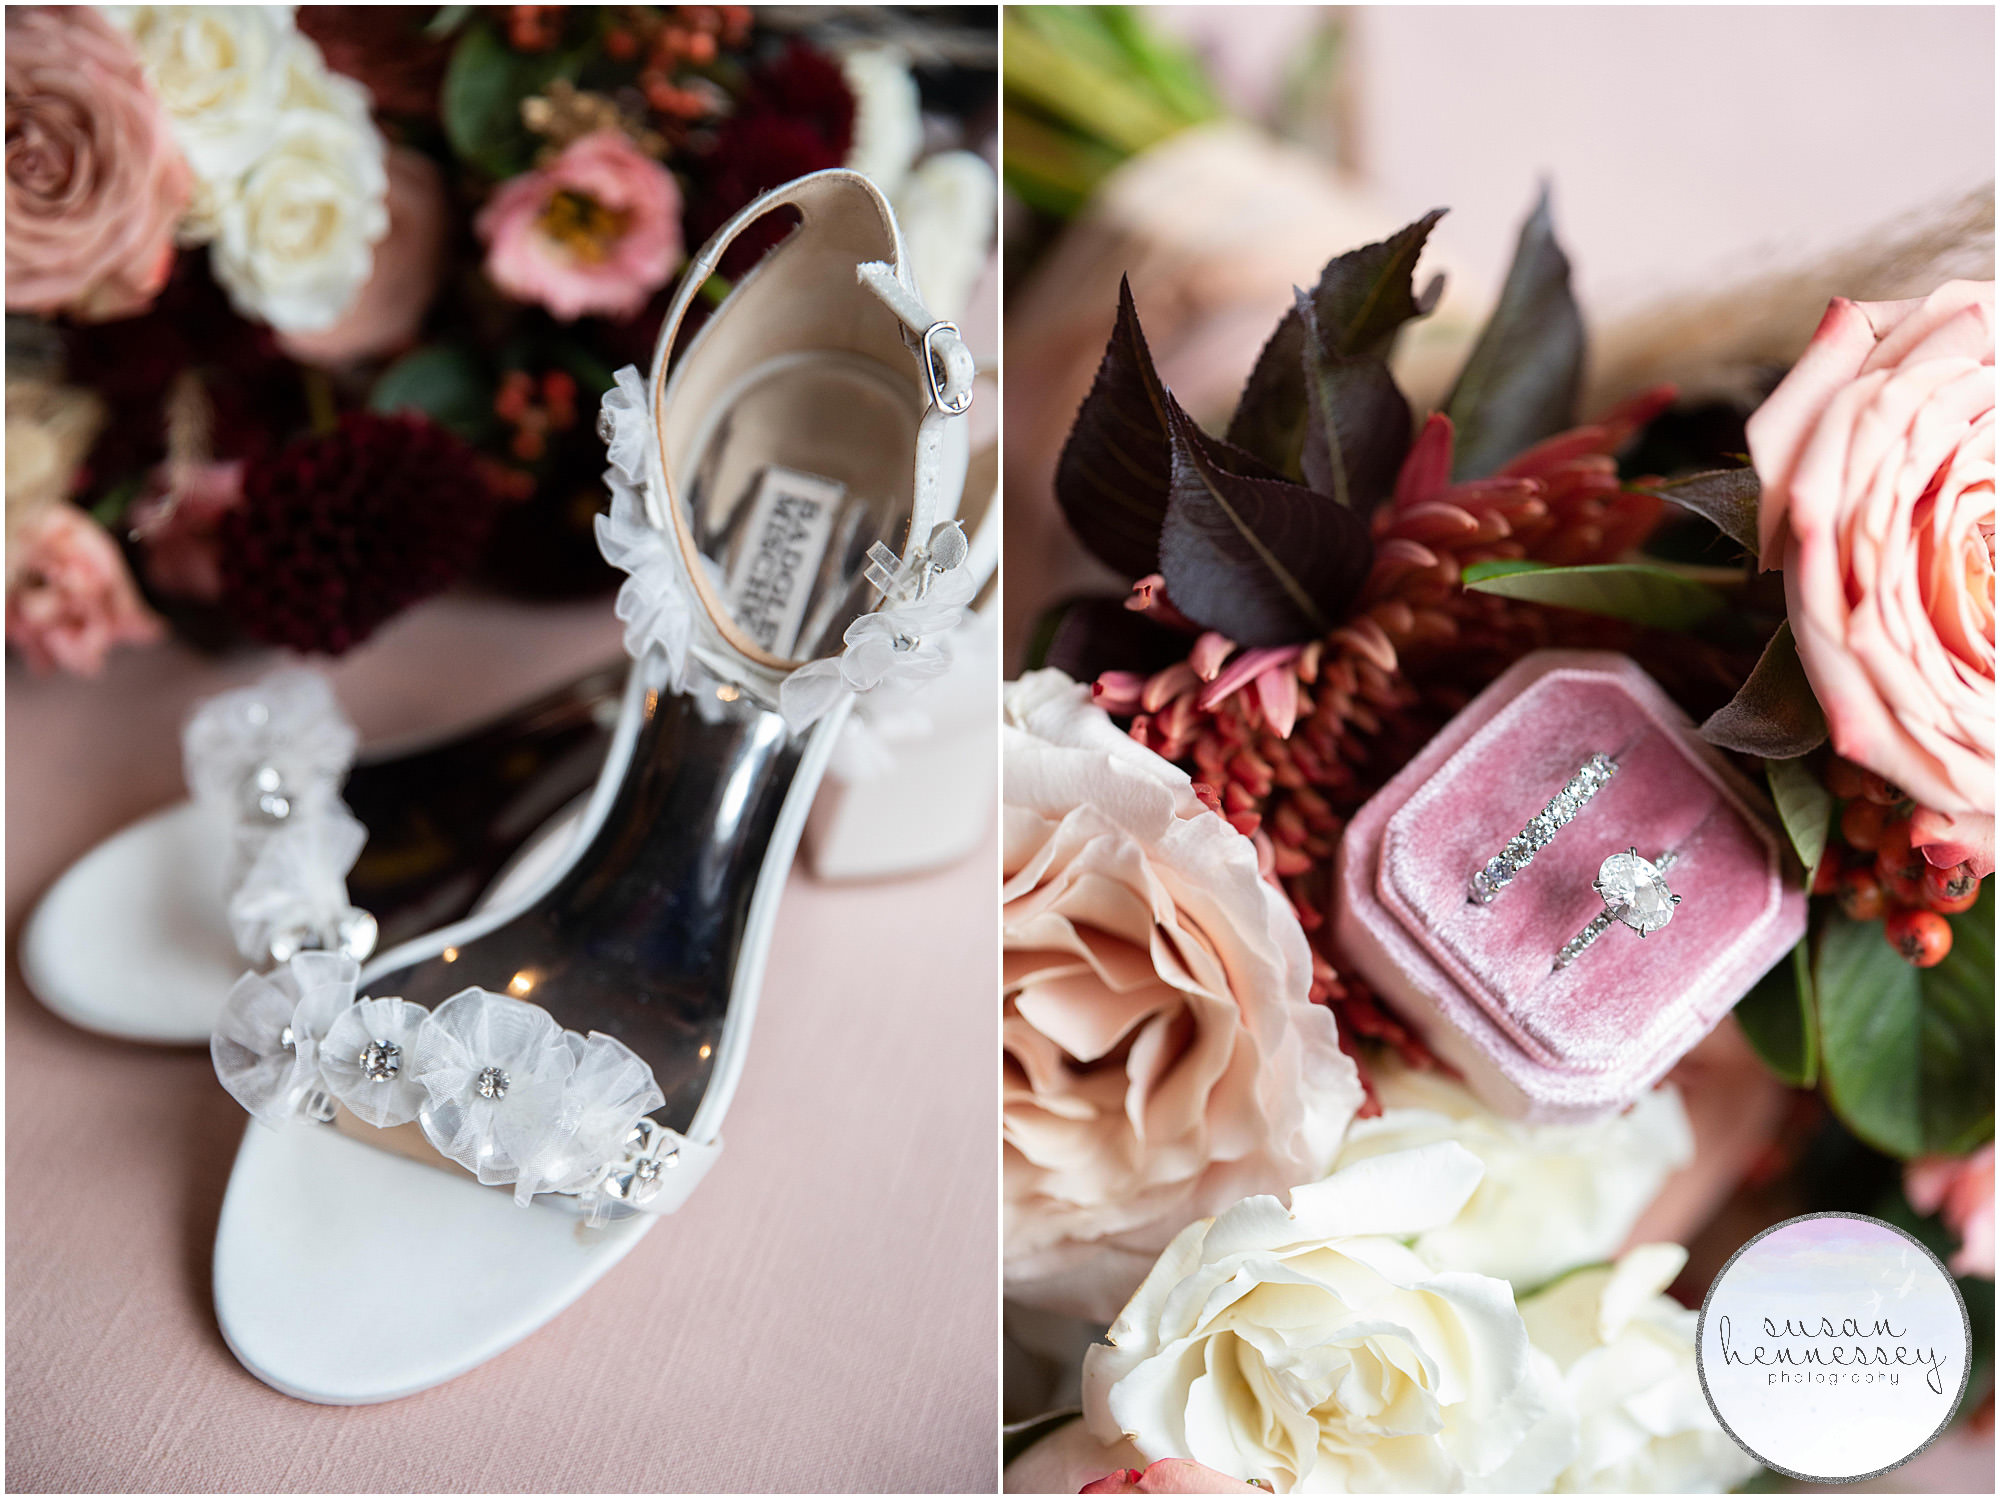 Bridal details at Andre's Lakeside Dining Microwedding